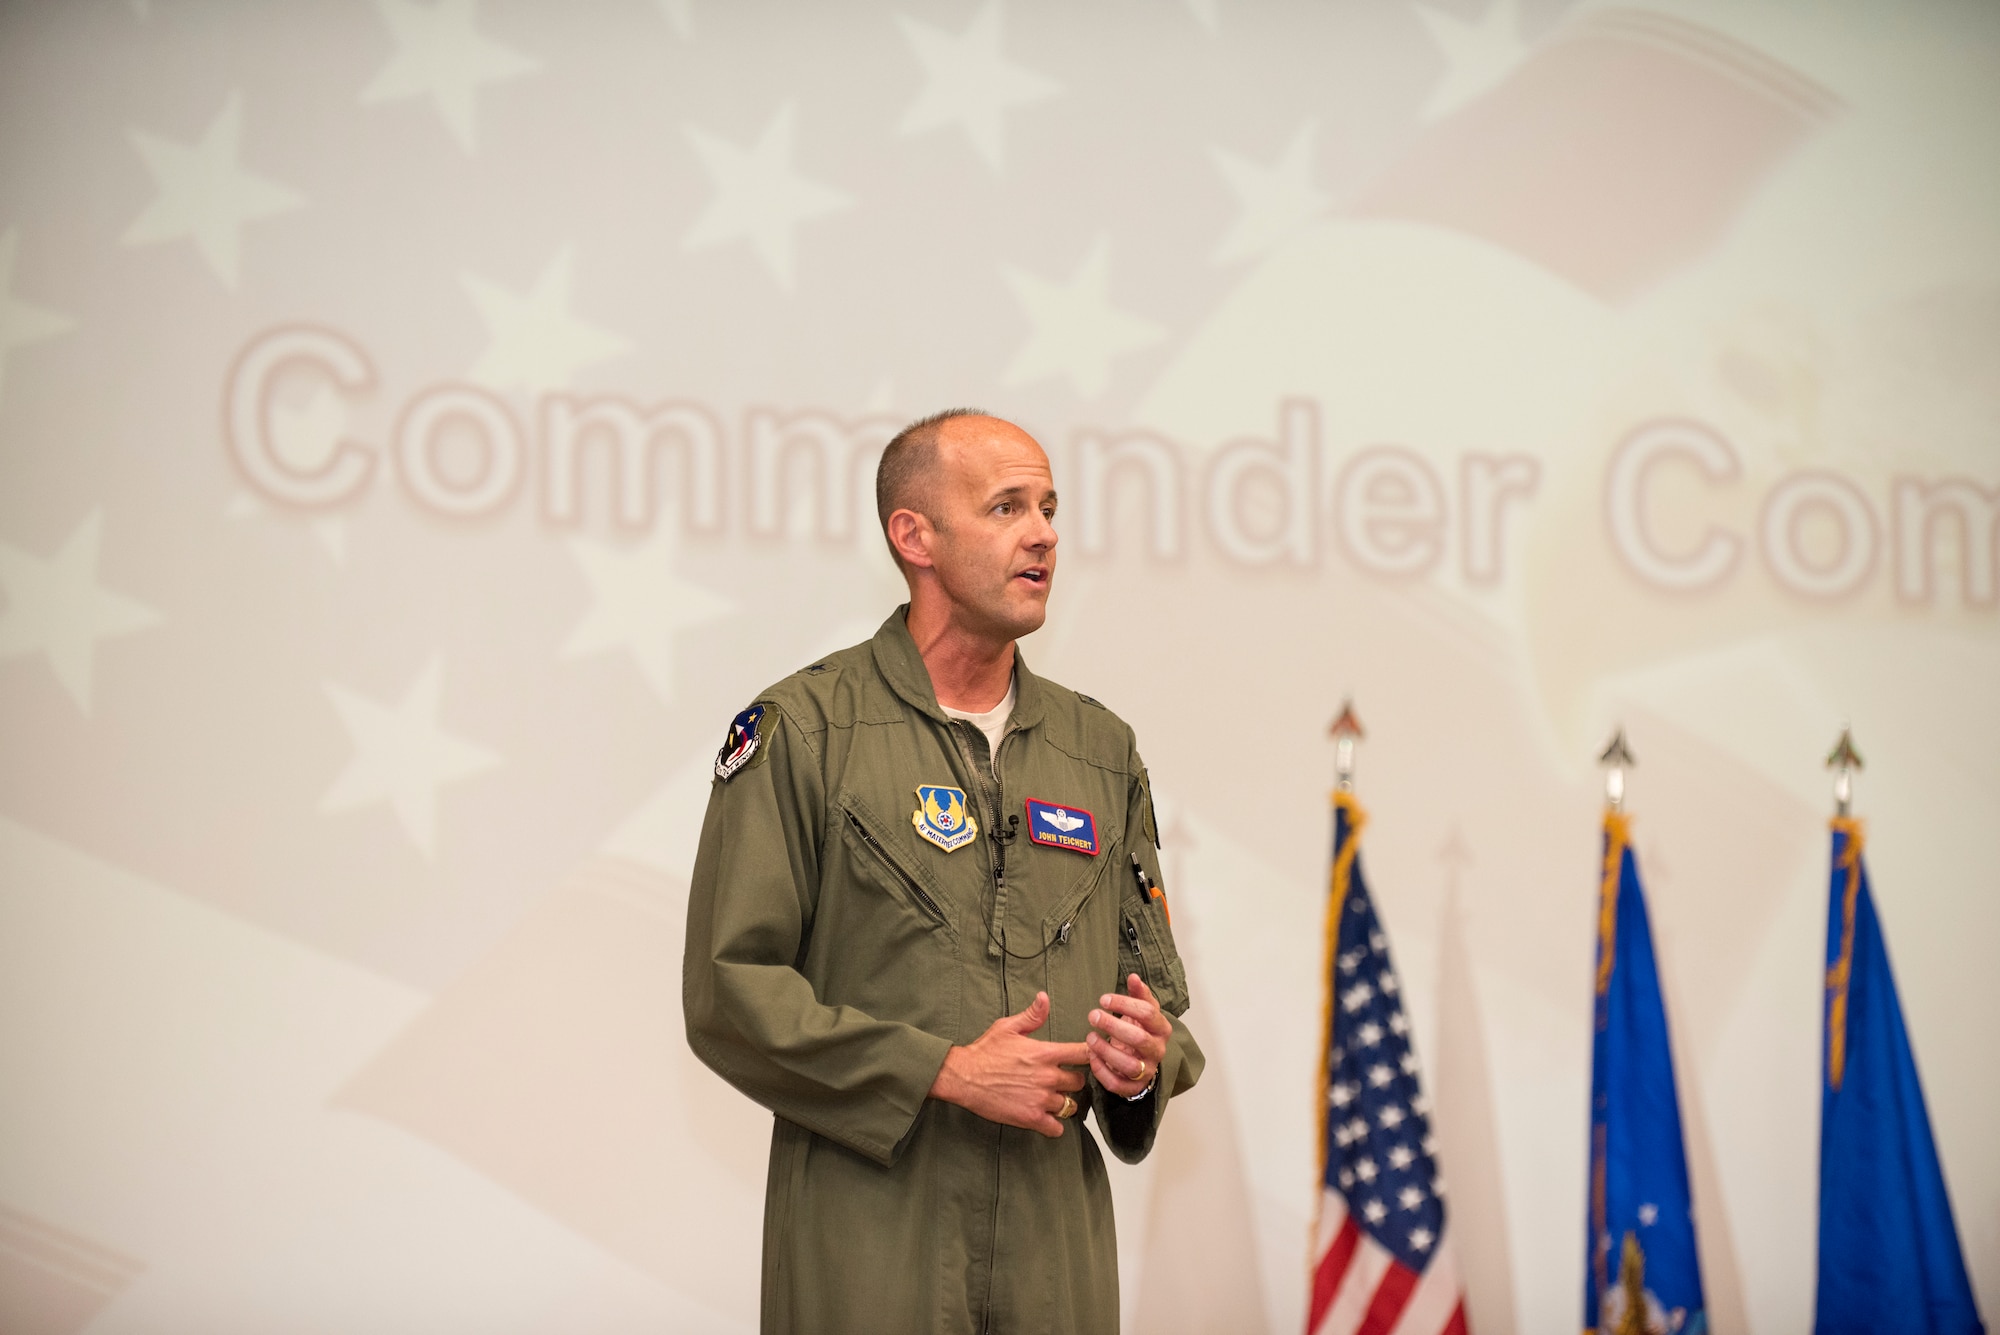 412th Test Wing Commander, Brig. Gen. E. John Teichert, addresses Airmen and civilian personnel during a Commander's Call event at Edwards Air Force Base, California, Aug. 7. (U.S. Air Force photo by Richard Gonzales)